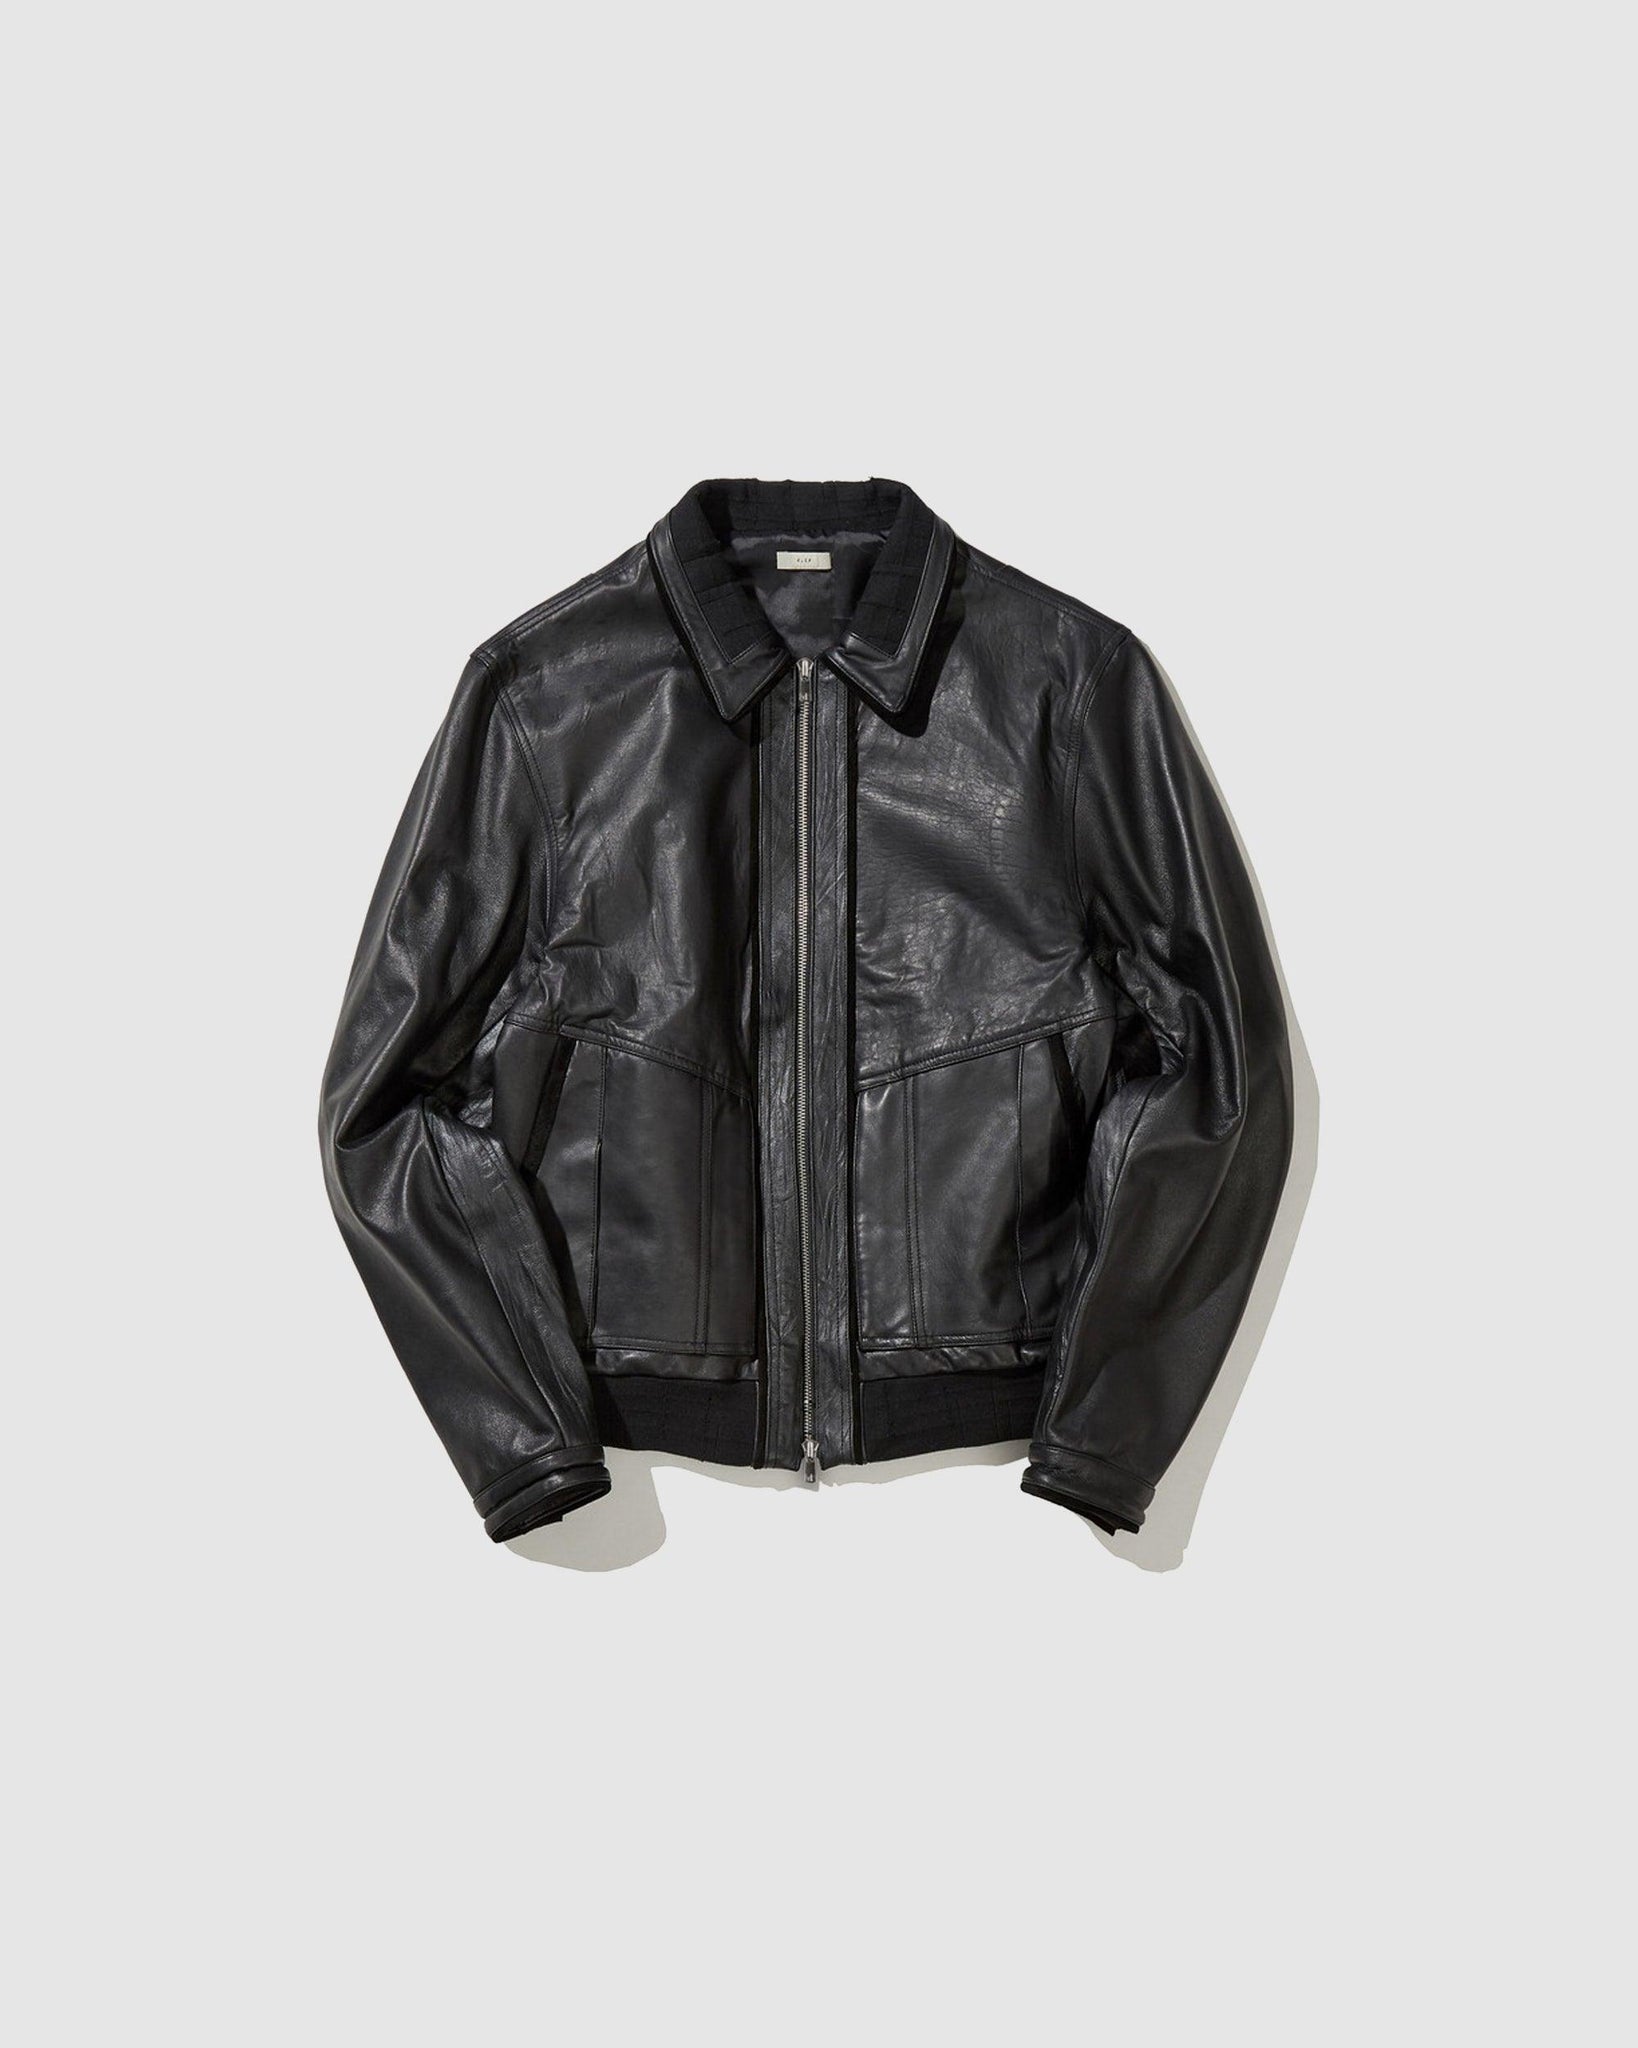 02 Leather Jacket - {{ collection.title }} - Chinatown Country Club 